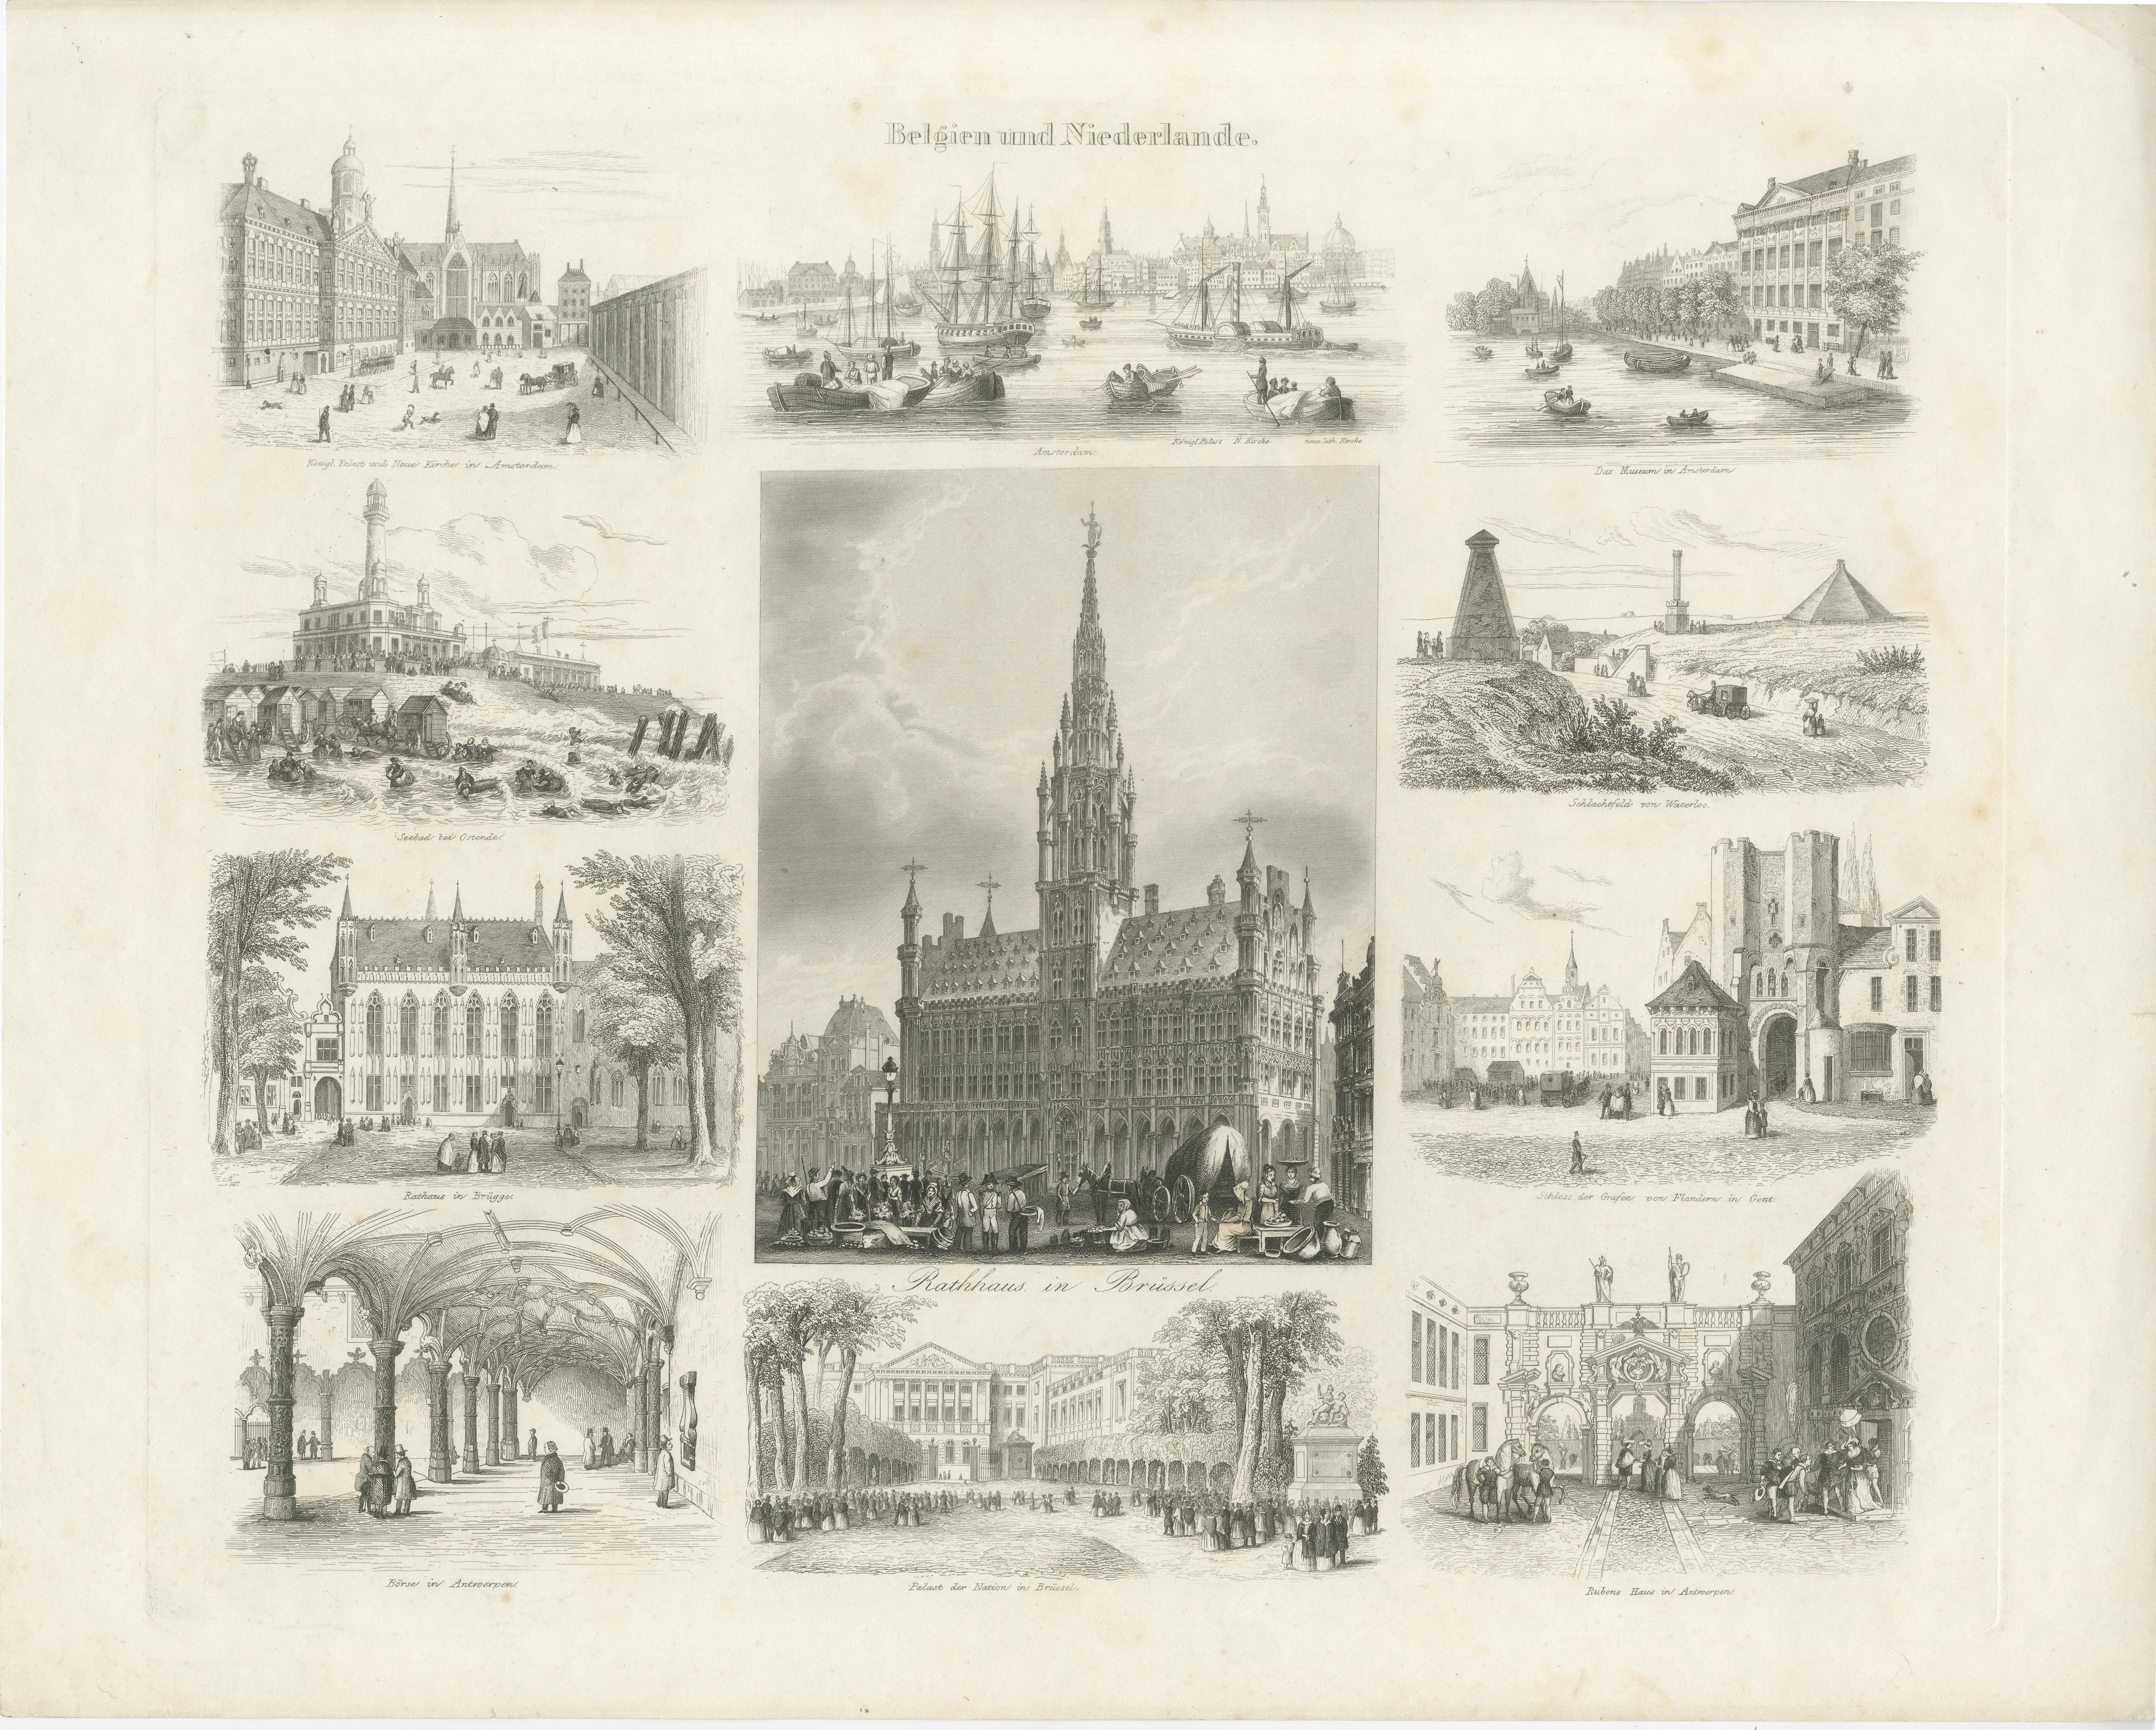 Antique print titled 'Belgien und Niederlande'. Steel engraving with various views of Belgium and the Netherlands. The views in the print include: Town Hall at Brussels
Royal Palace at Amsterdam - Amsterdam - Museum in Amsterdam - Waterloo